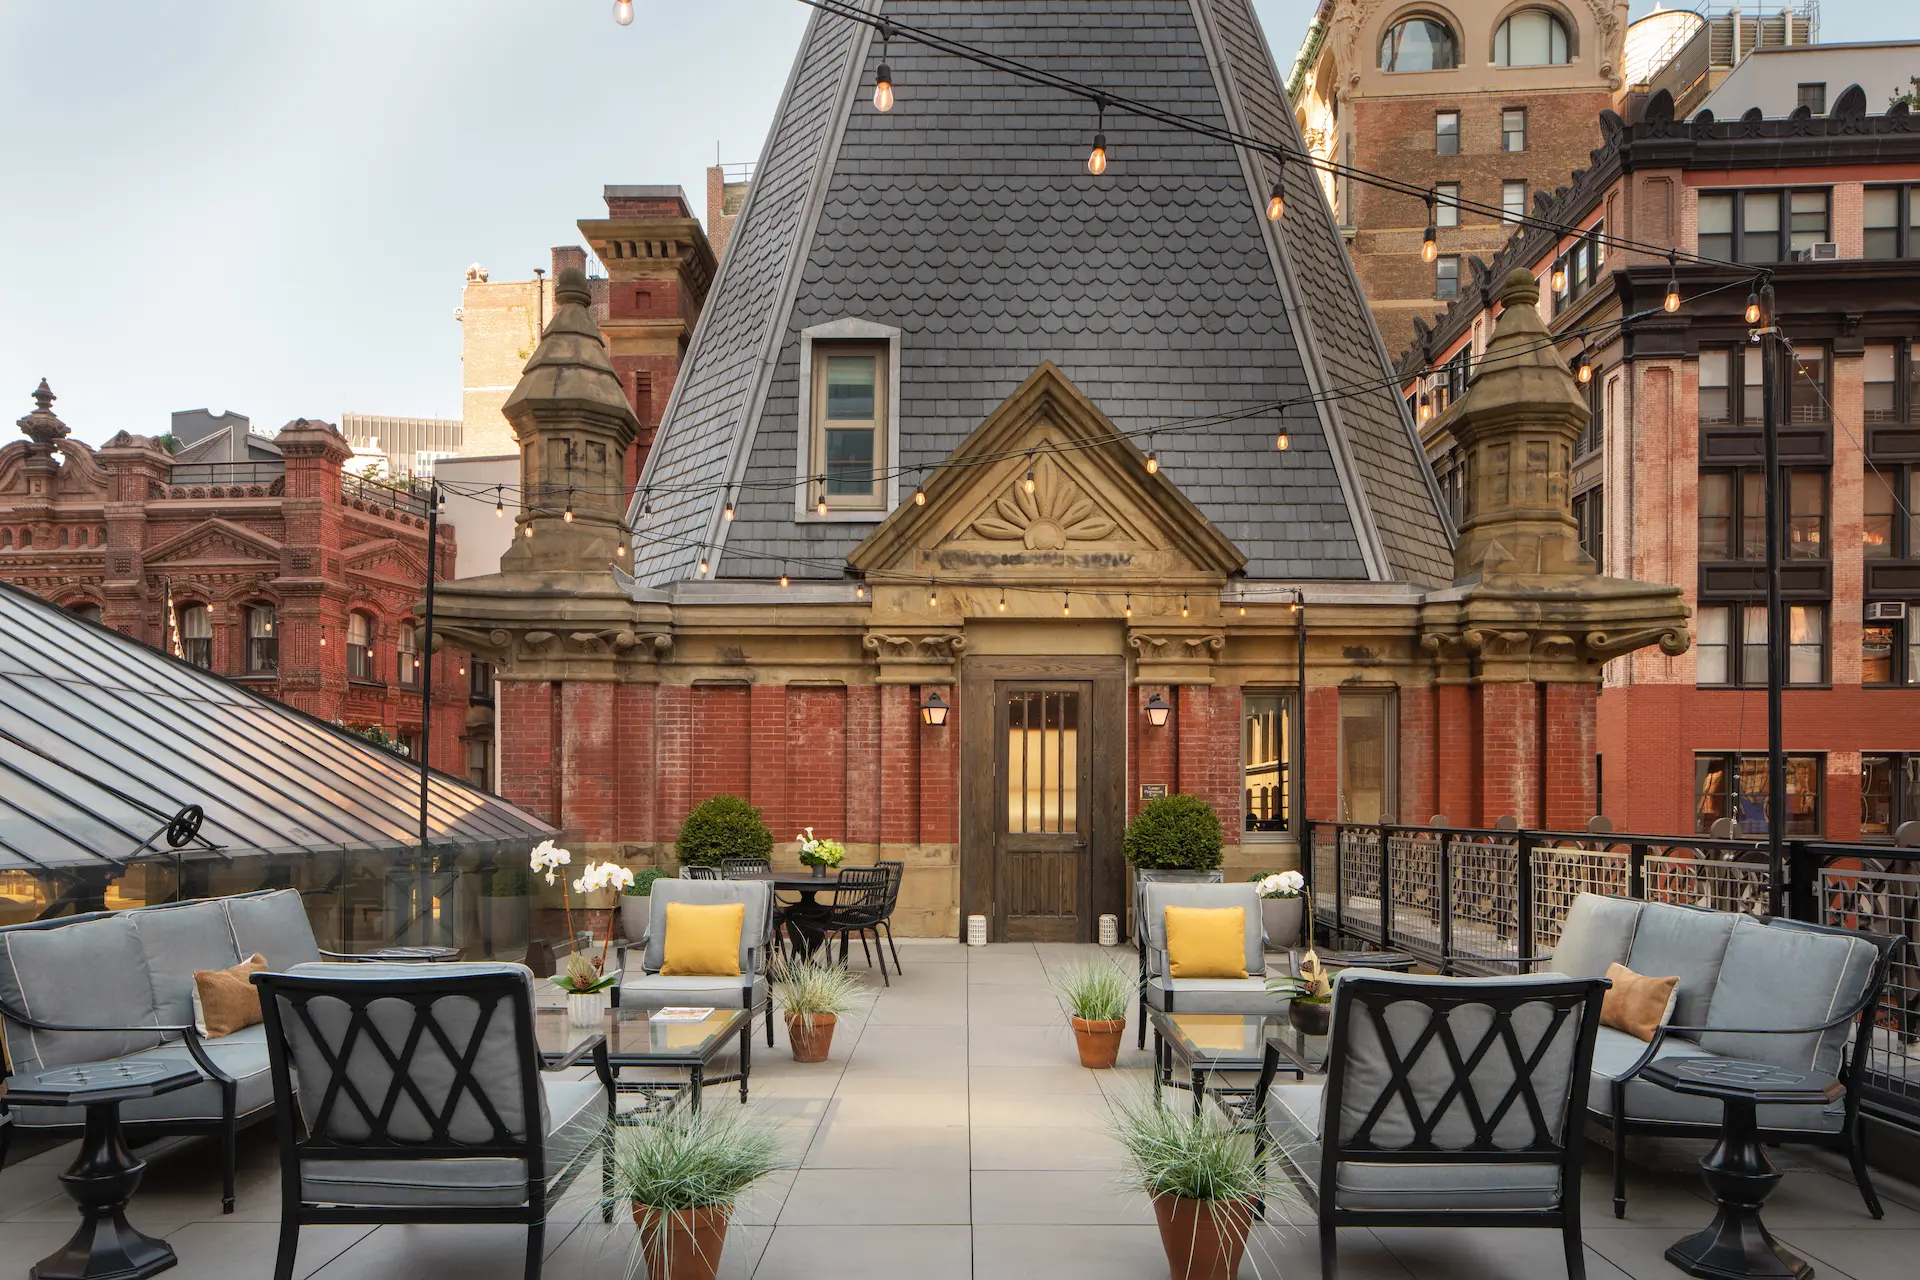 Rooftop relaxation area at The Beekman Hotel features sofas, providing a serene atmosphere.